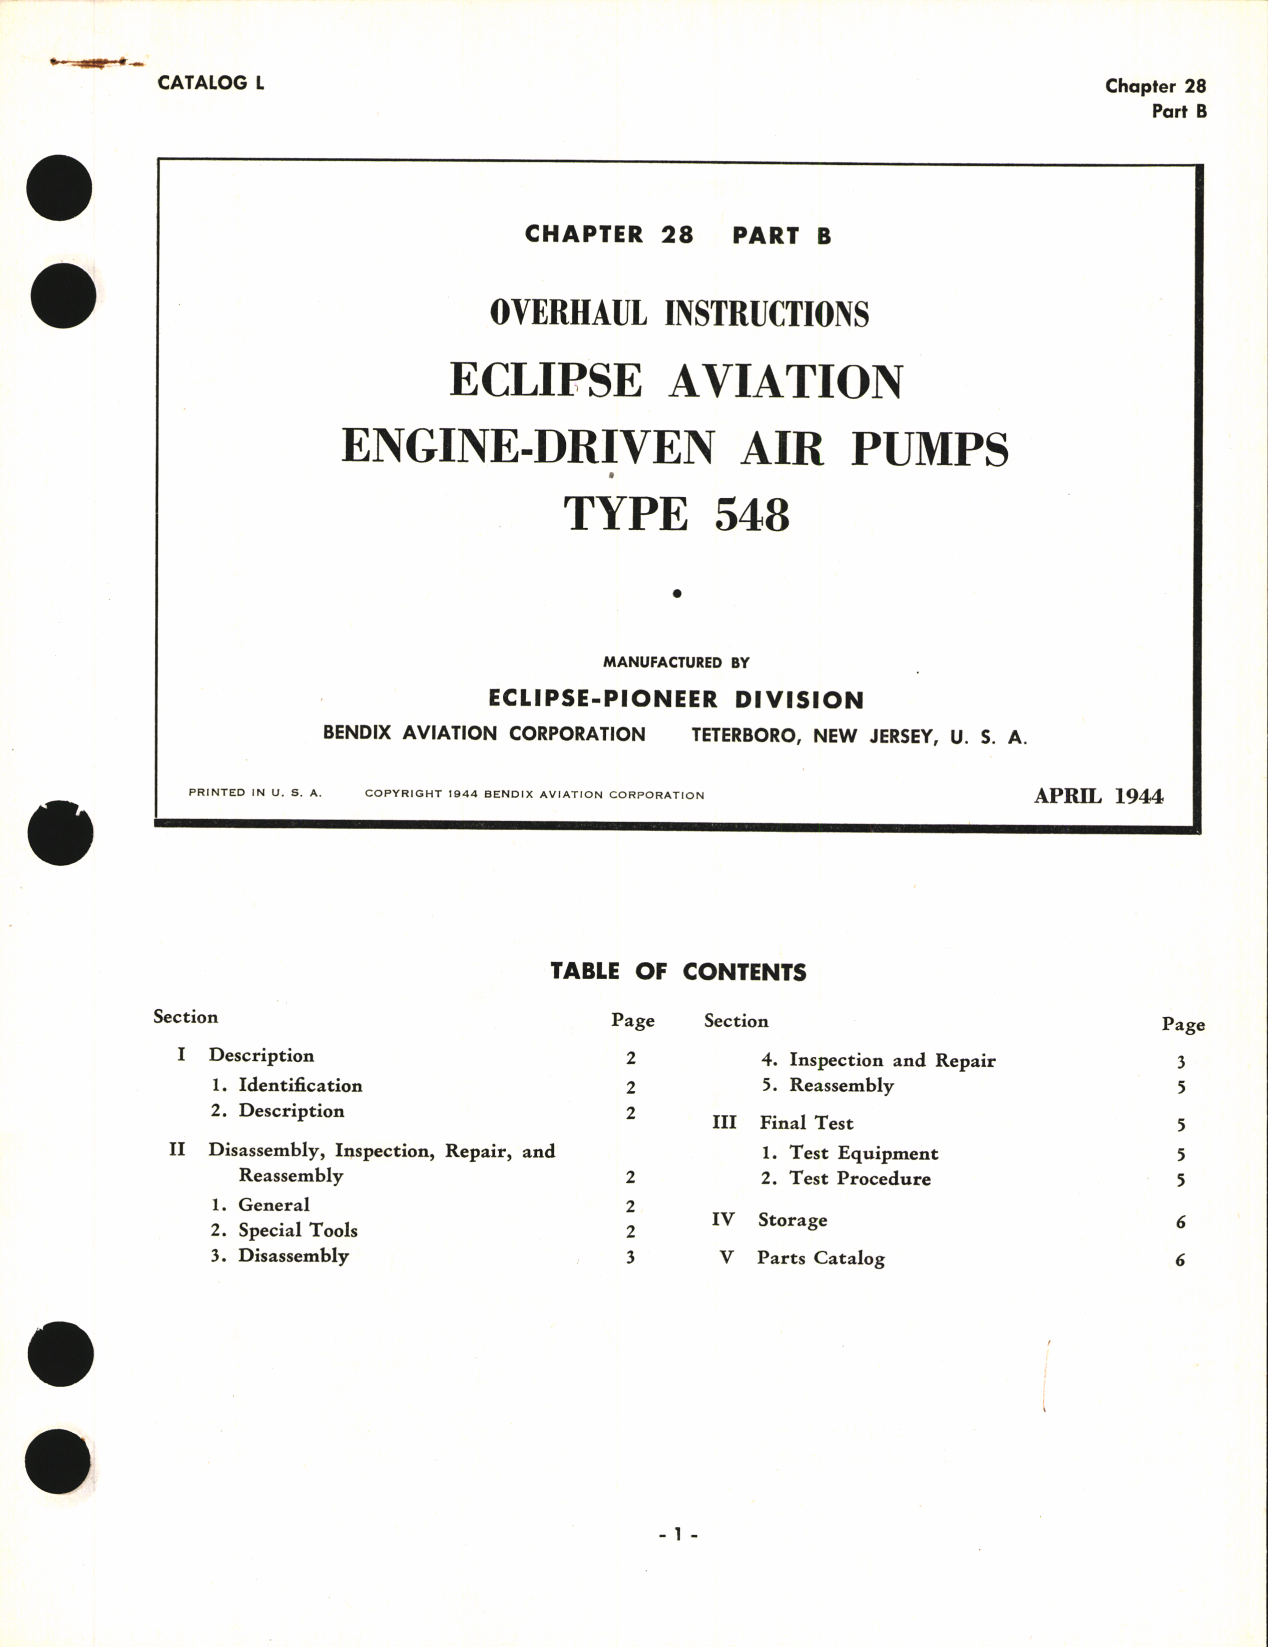 Sample page 7 from AirCorps Library document: Operating and Service Instructions for Eclipse Aviation Engine-Driven Air Pumps Type 548